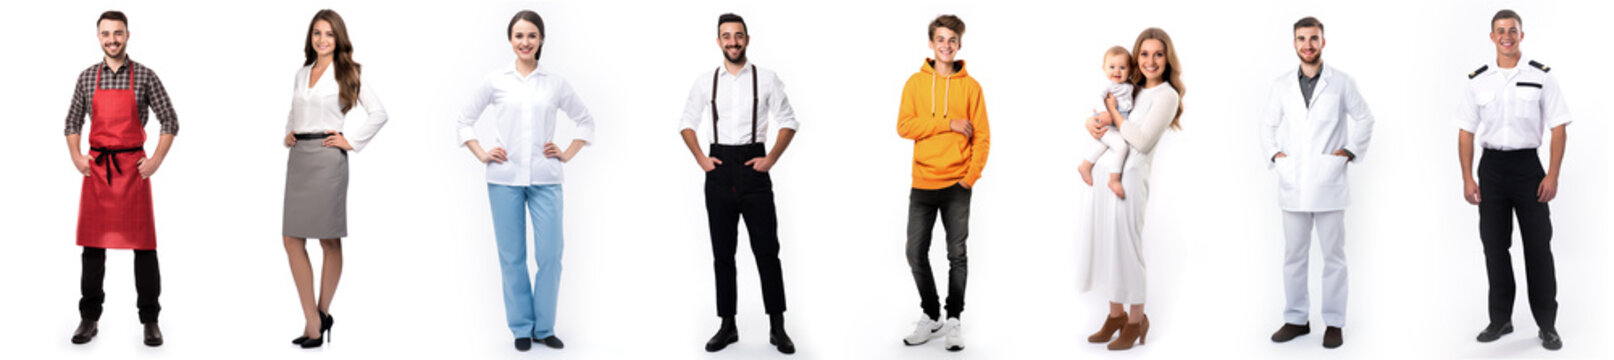 different people of all ages pose isolated on a white background